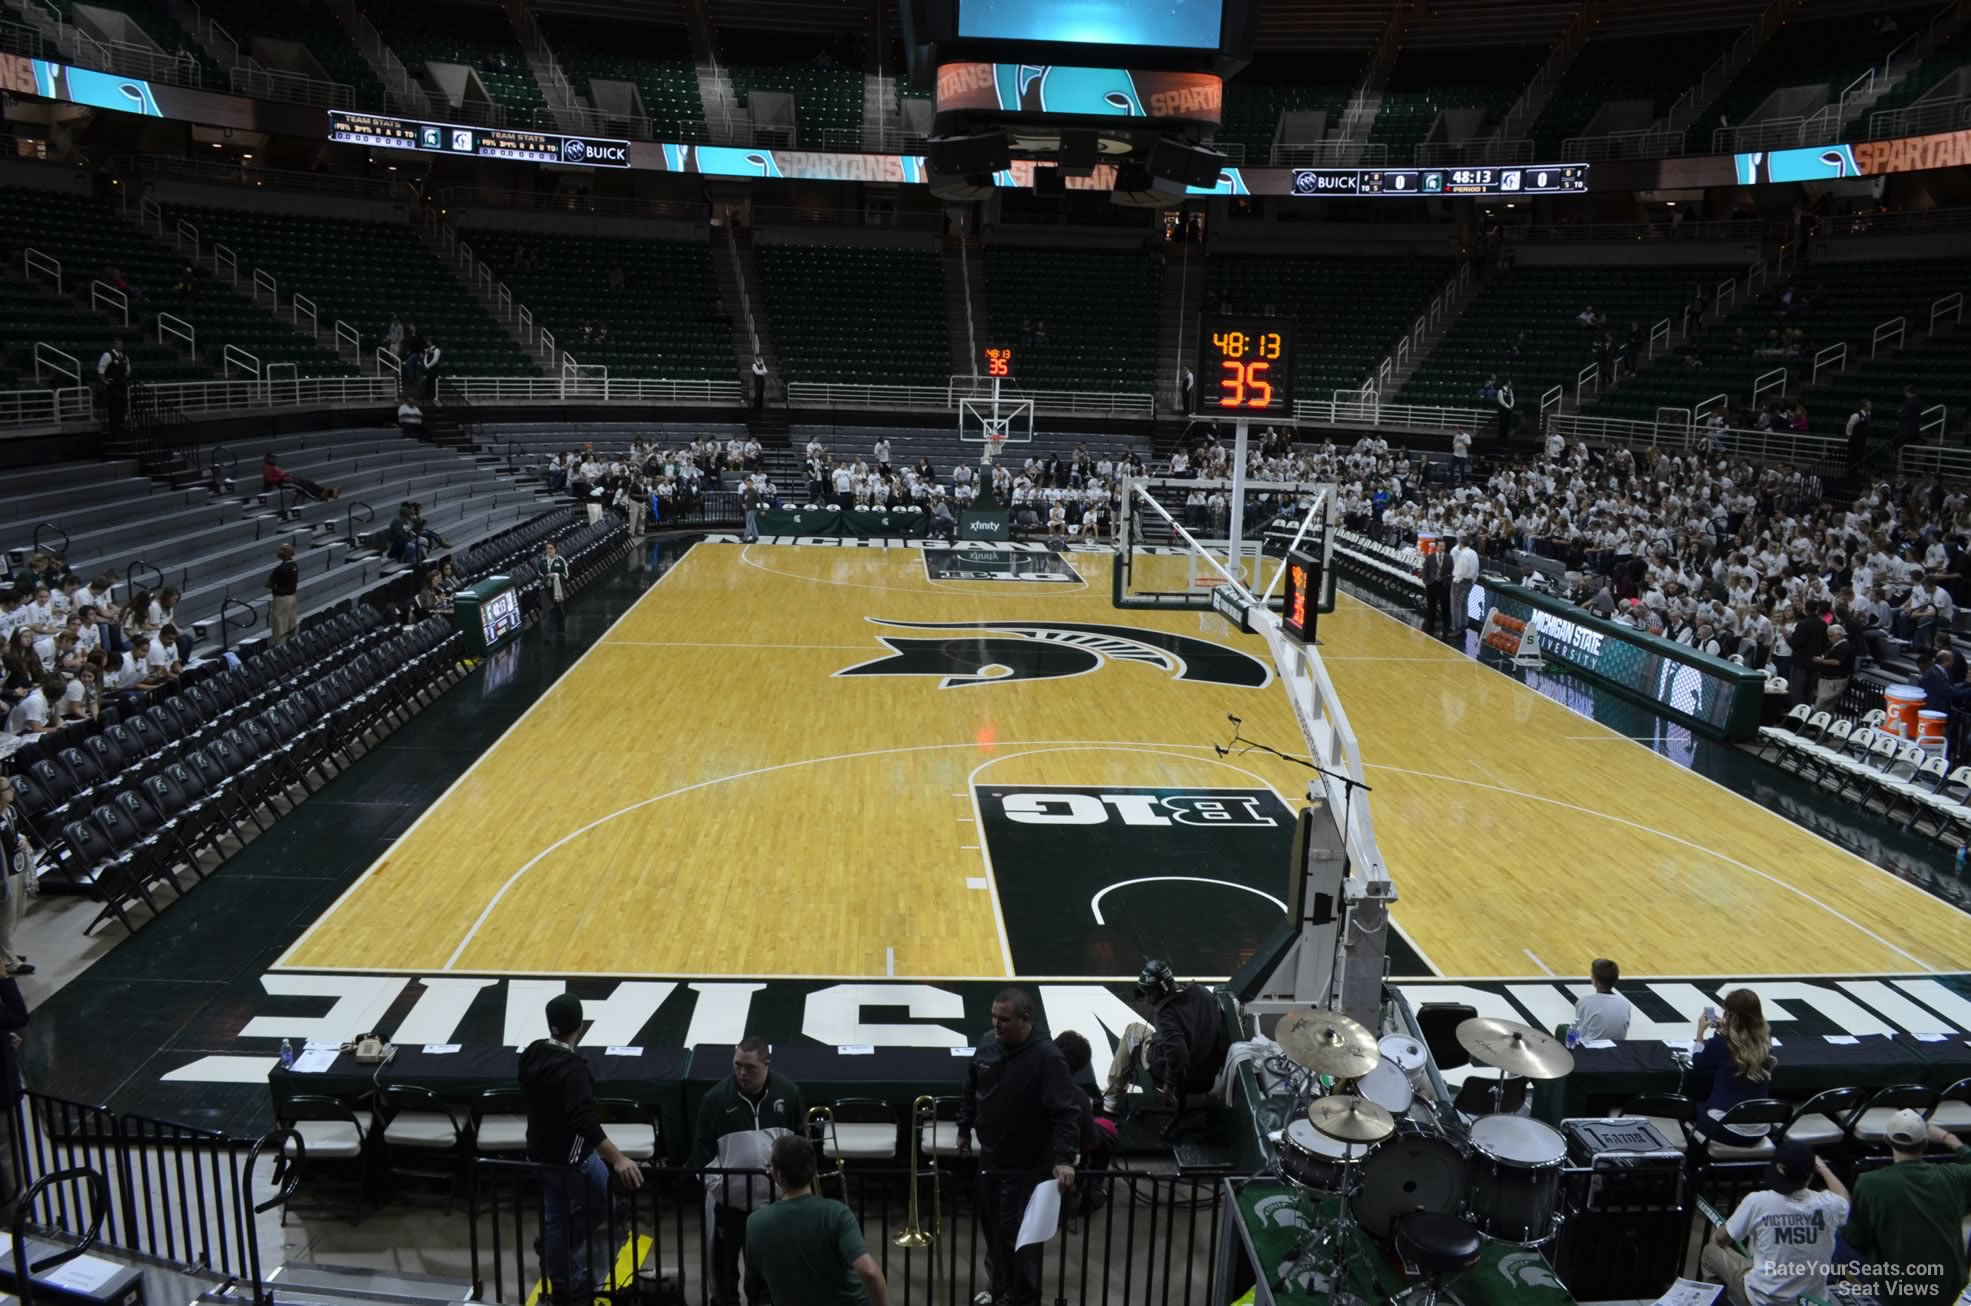 section 120, row 13 seat view  - breslin center